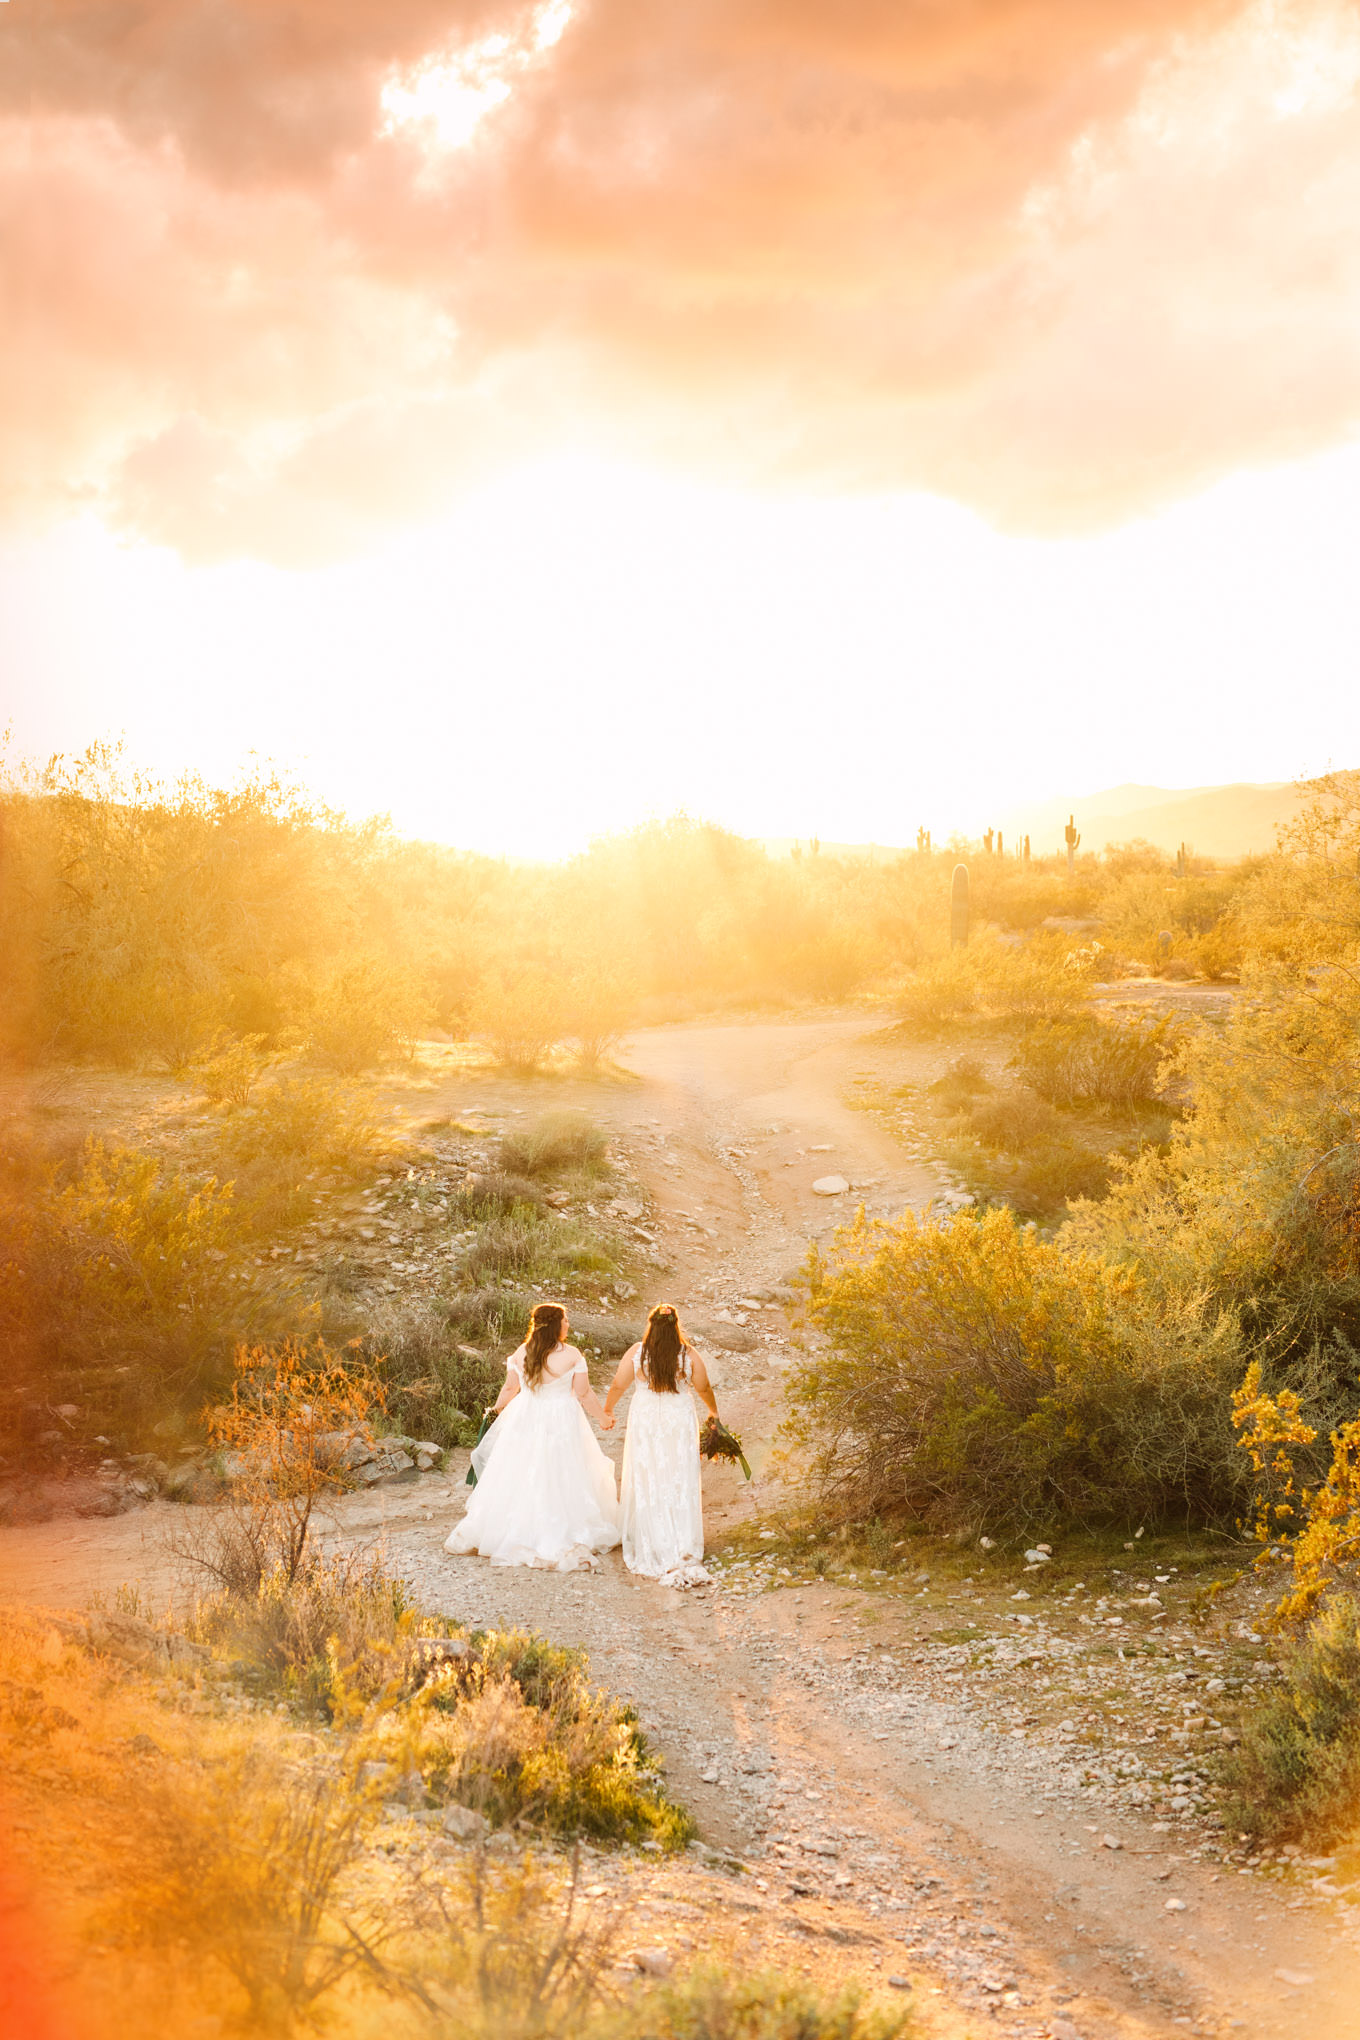 Two brides walking in Arizona desert | Engagement, elopement, and wedding photography roundup of Mary Costa’s favorite images from 2020 | Colorful and elevated photography for fun-loving couples in Southern California | #2020wedding #elopement #weddingphoto #weddingphotography   Source: Mary Costa Photography | Los Angeles